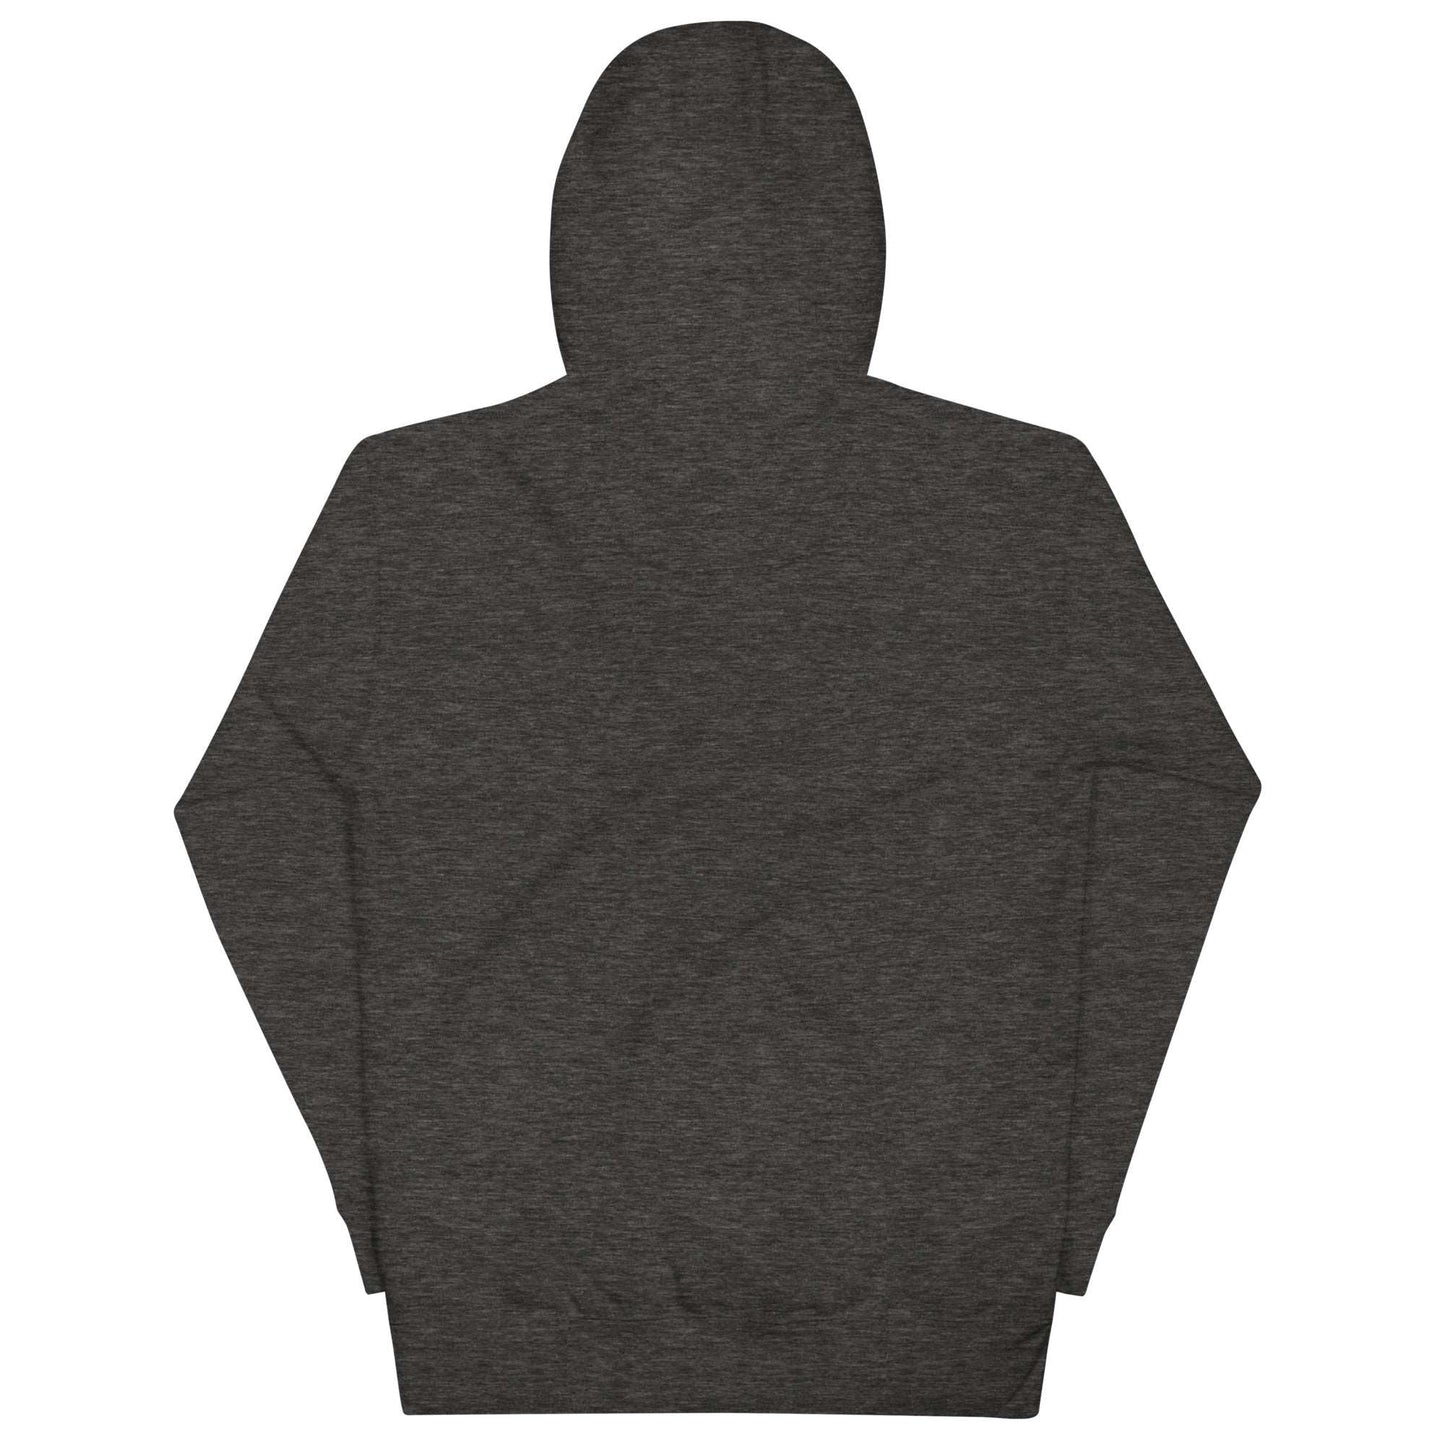 back hoodie Logo dark gray by B.Different Clothing independent streetwear brand inspired by street art graffiti